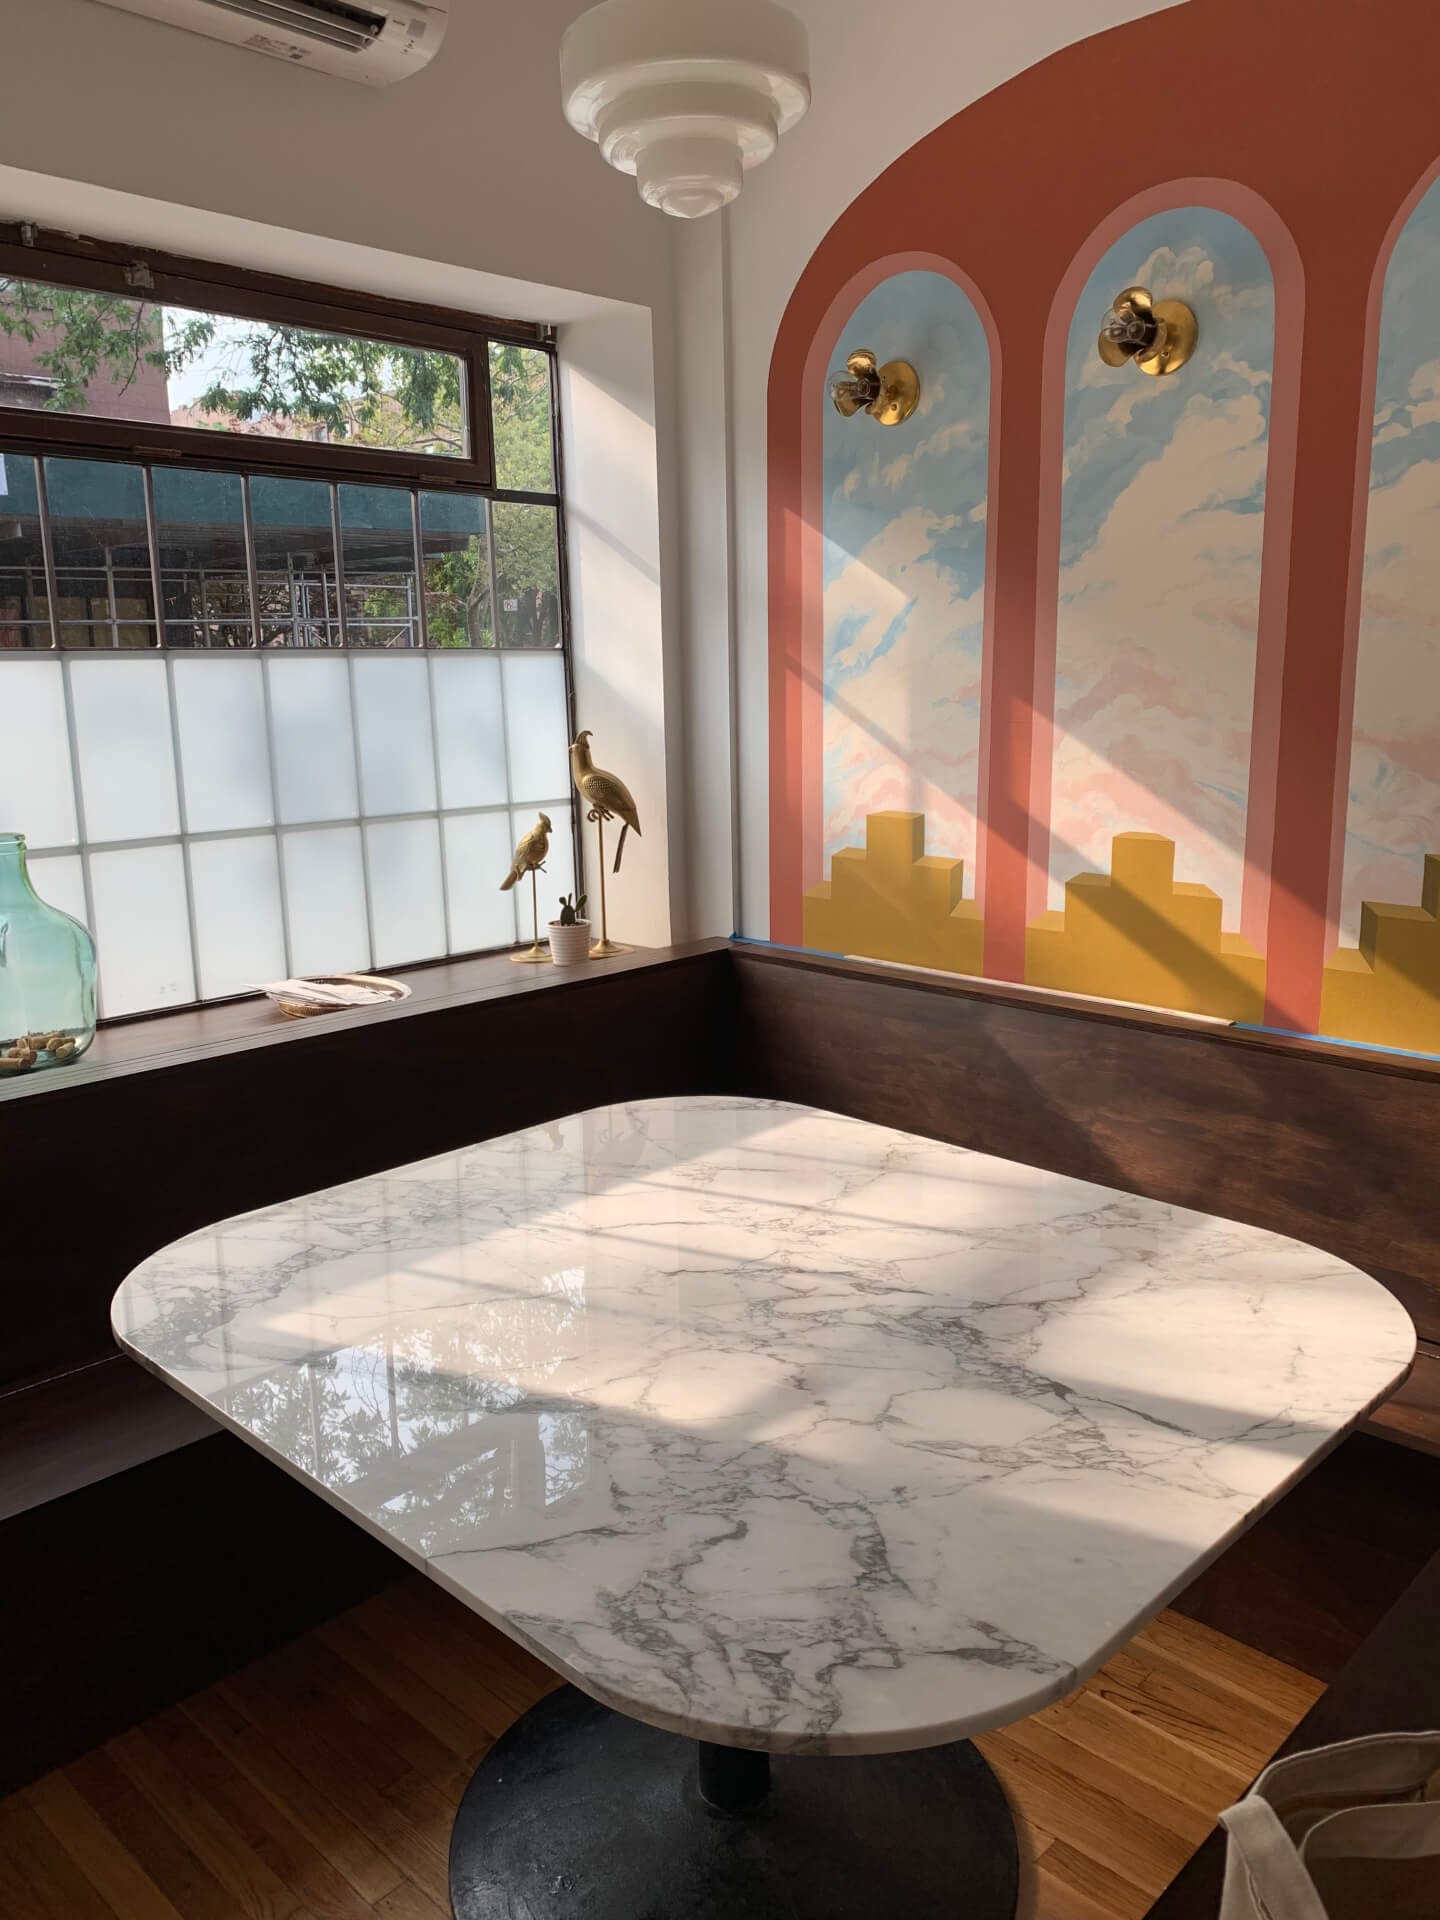 A marble kitchen table lit by a large window with walnut booth seating and a hand-painted mural